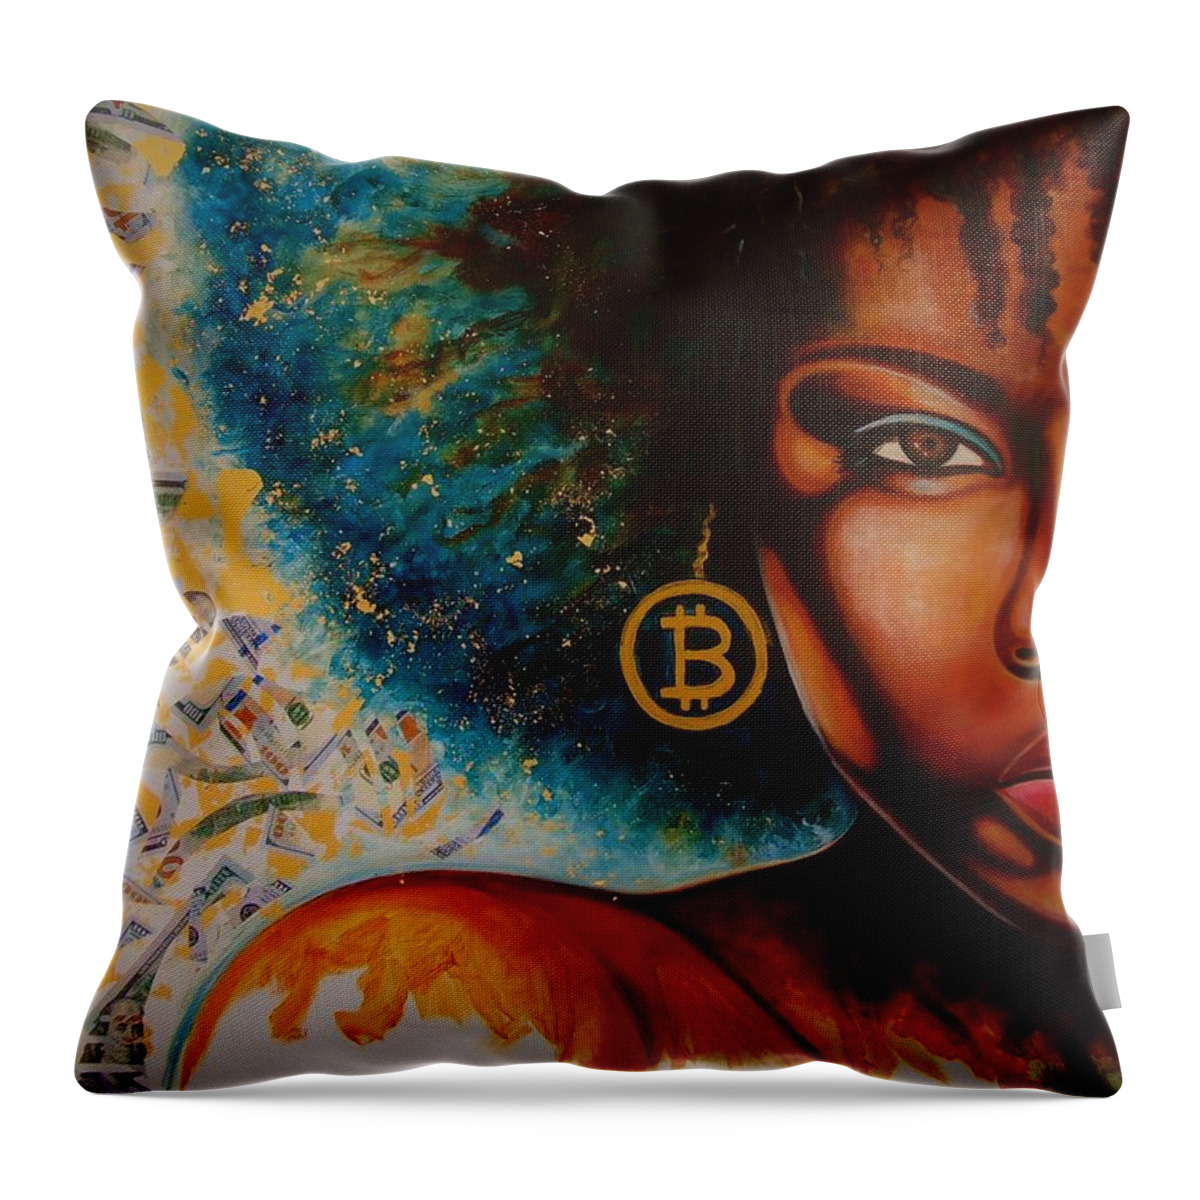 Black Art Throw Pillow featuring the painting Big Coin by Emery Franklin